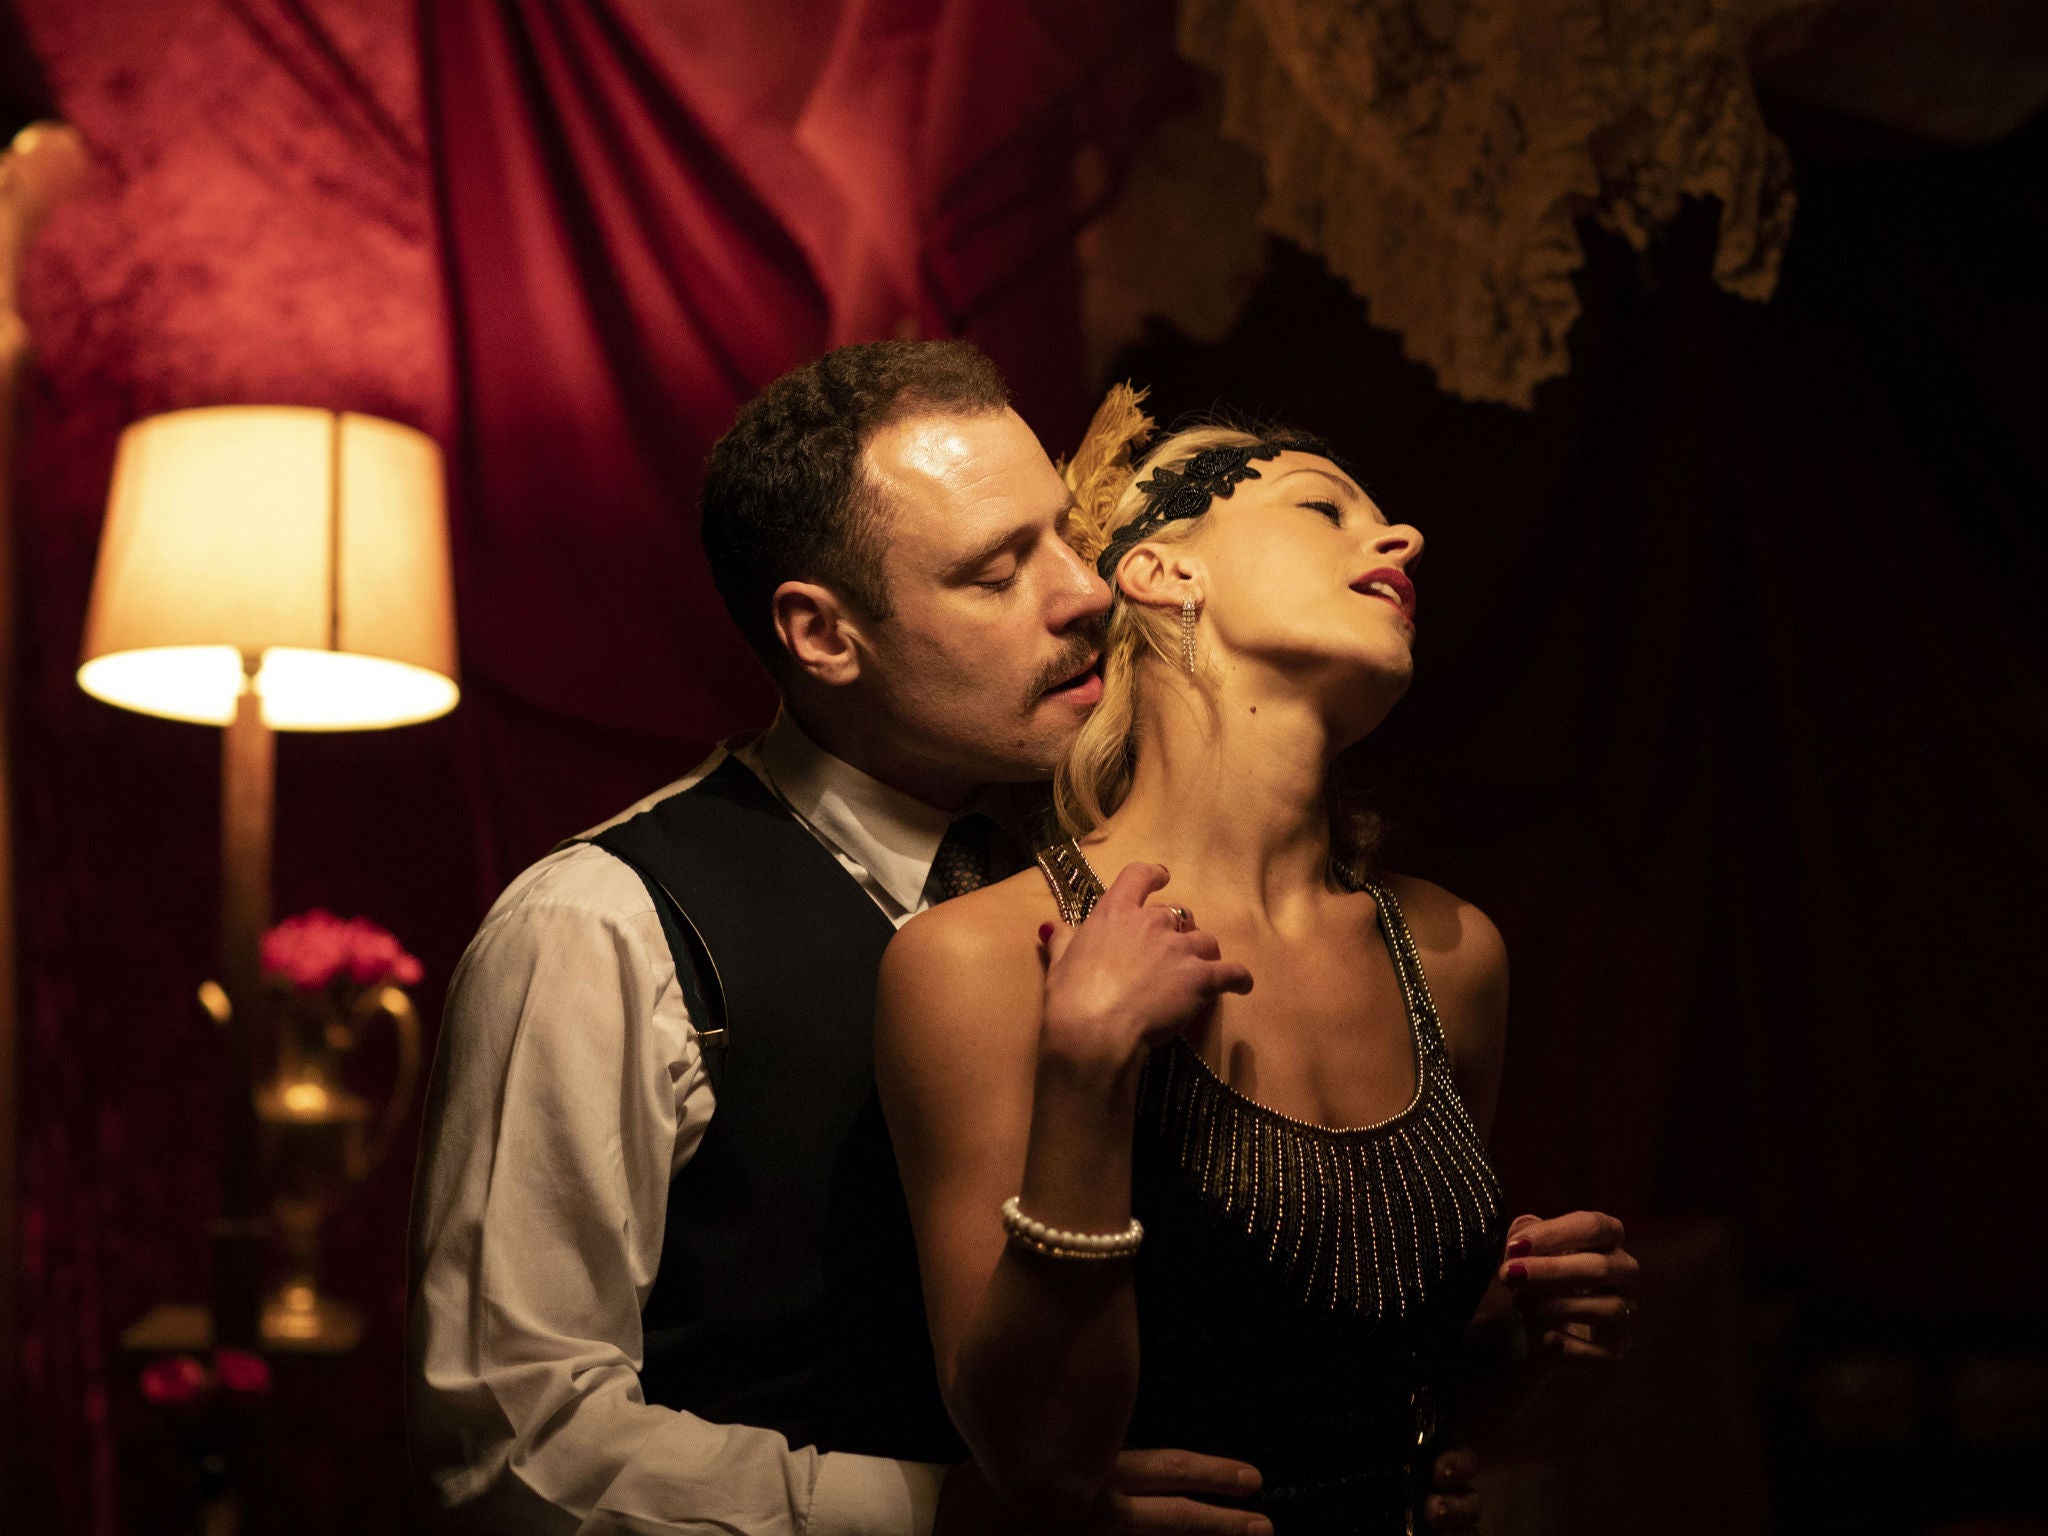 Immersive theatre may be sexy image